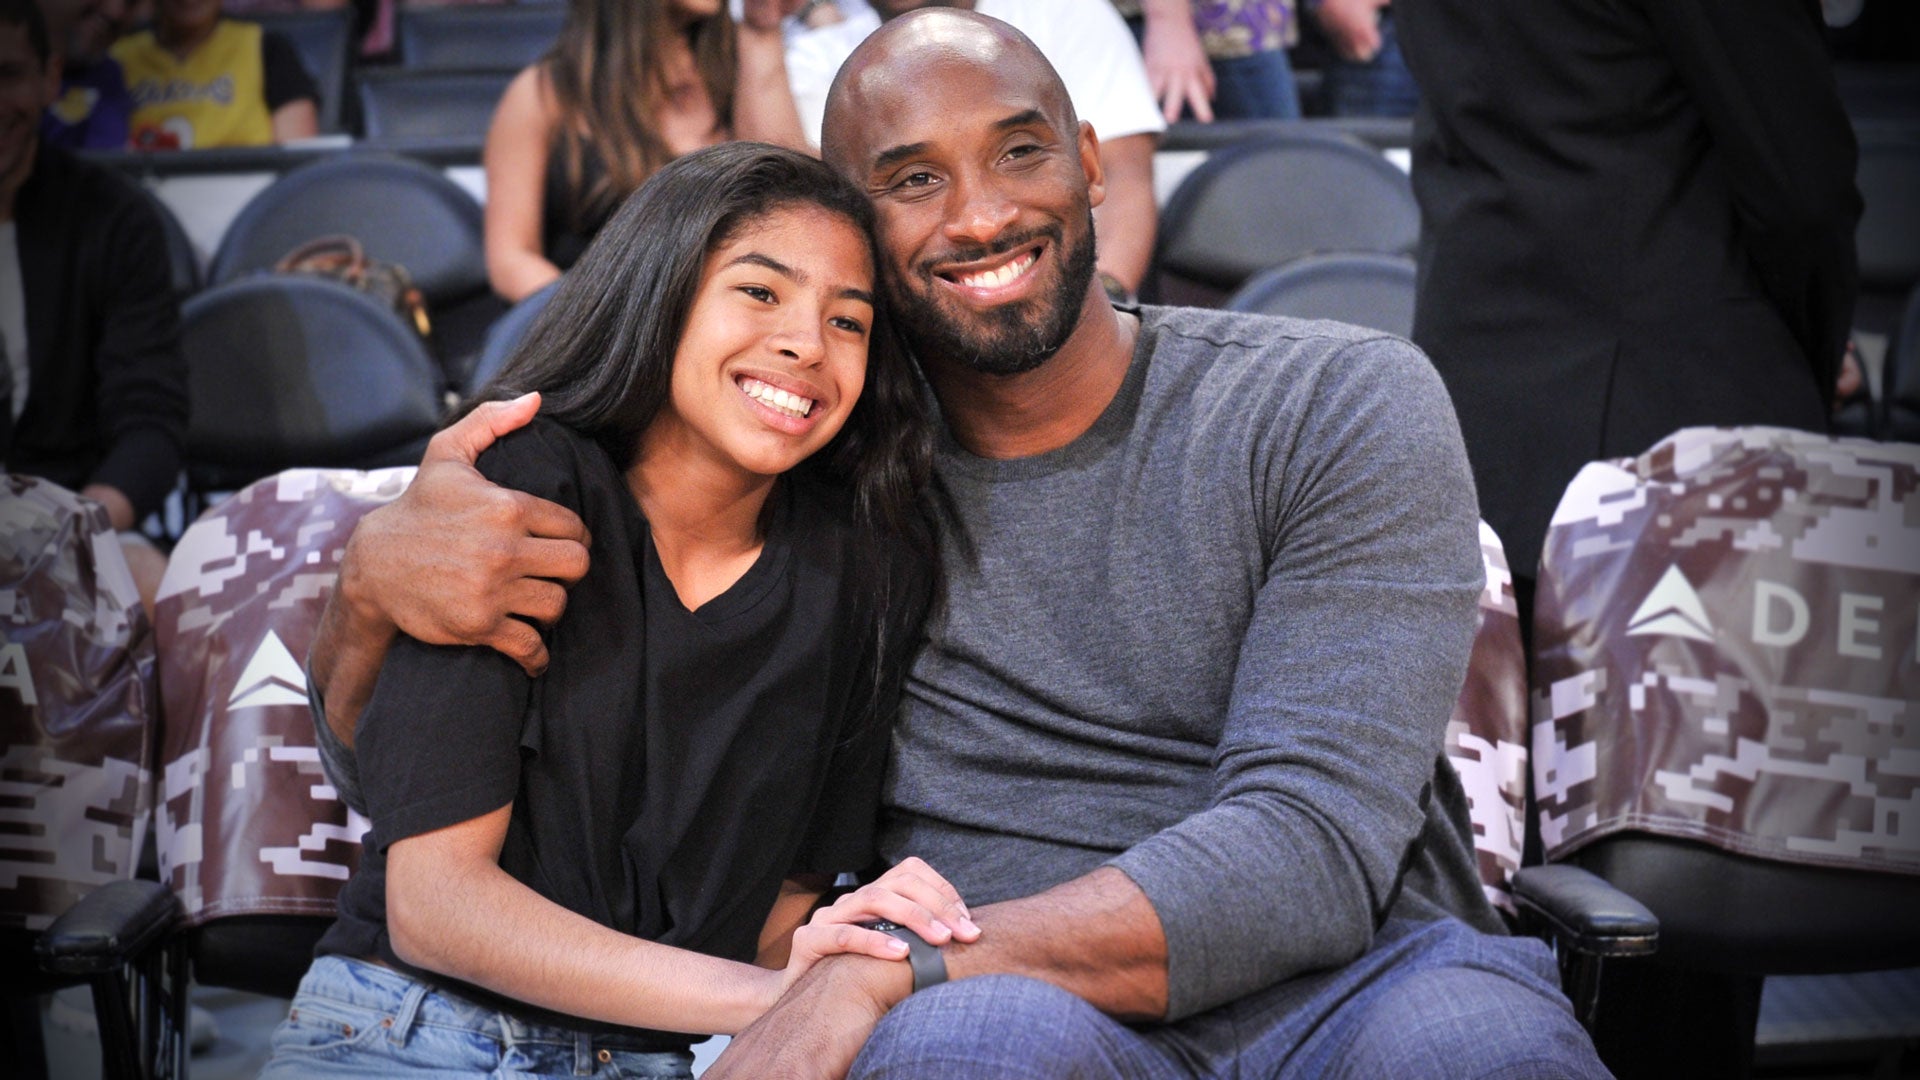 It's been 3 years since Philadelphia native and Eagles fan Kobe Bryant was  tragically killed in a helicopter crash with his daughter Gigi.…